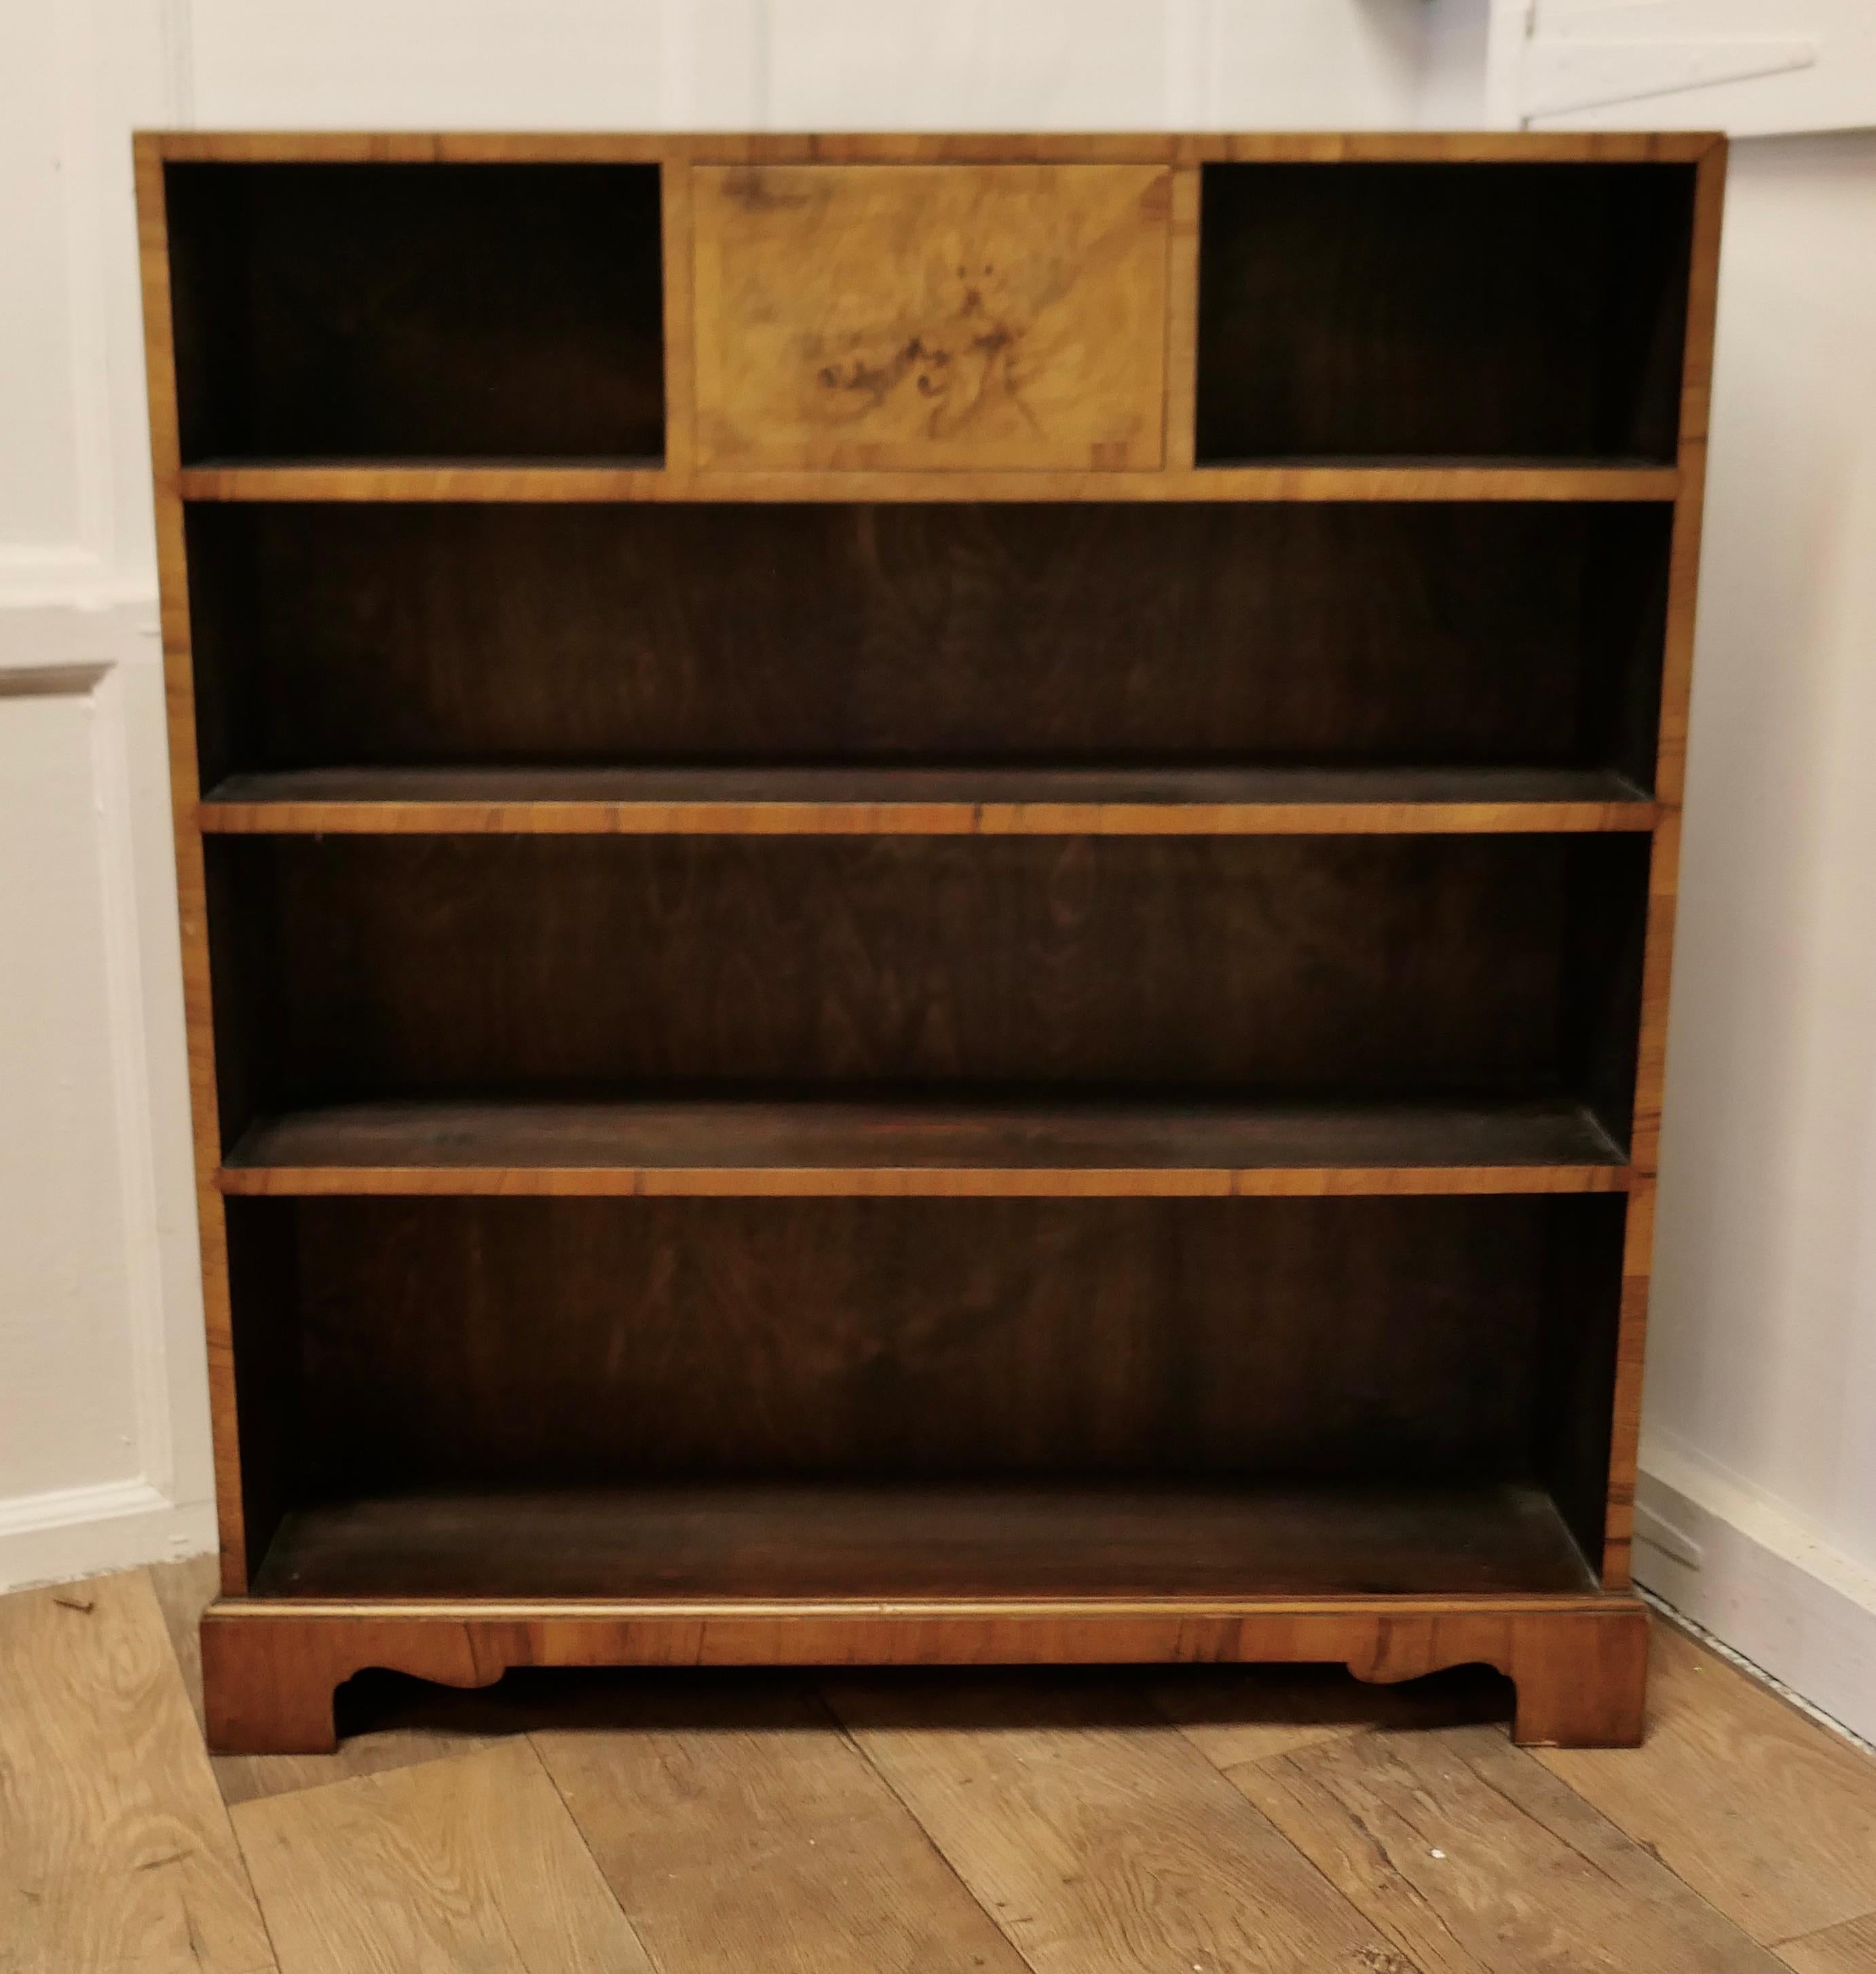 A Superb Odeon Style Walnut Open Bookcase

This is a good quality Art Deco Bur Walnut open book shelf, not completely open as there is a very concealed compartment in the centre of the top shelf and the bookcase stands on a bracket footed plinth
The